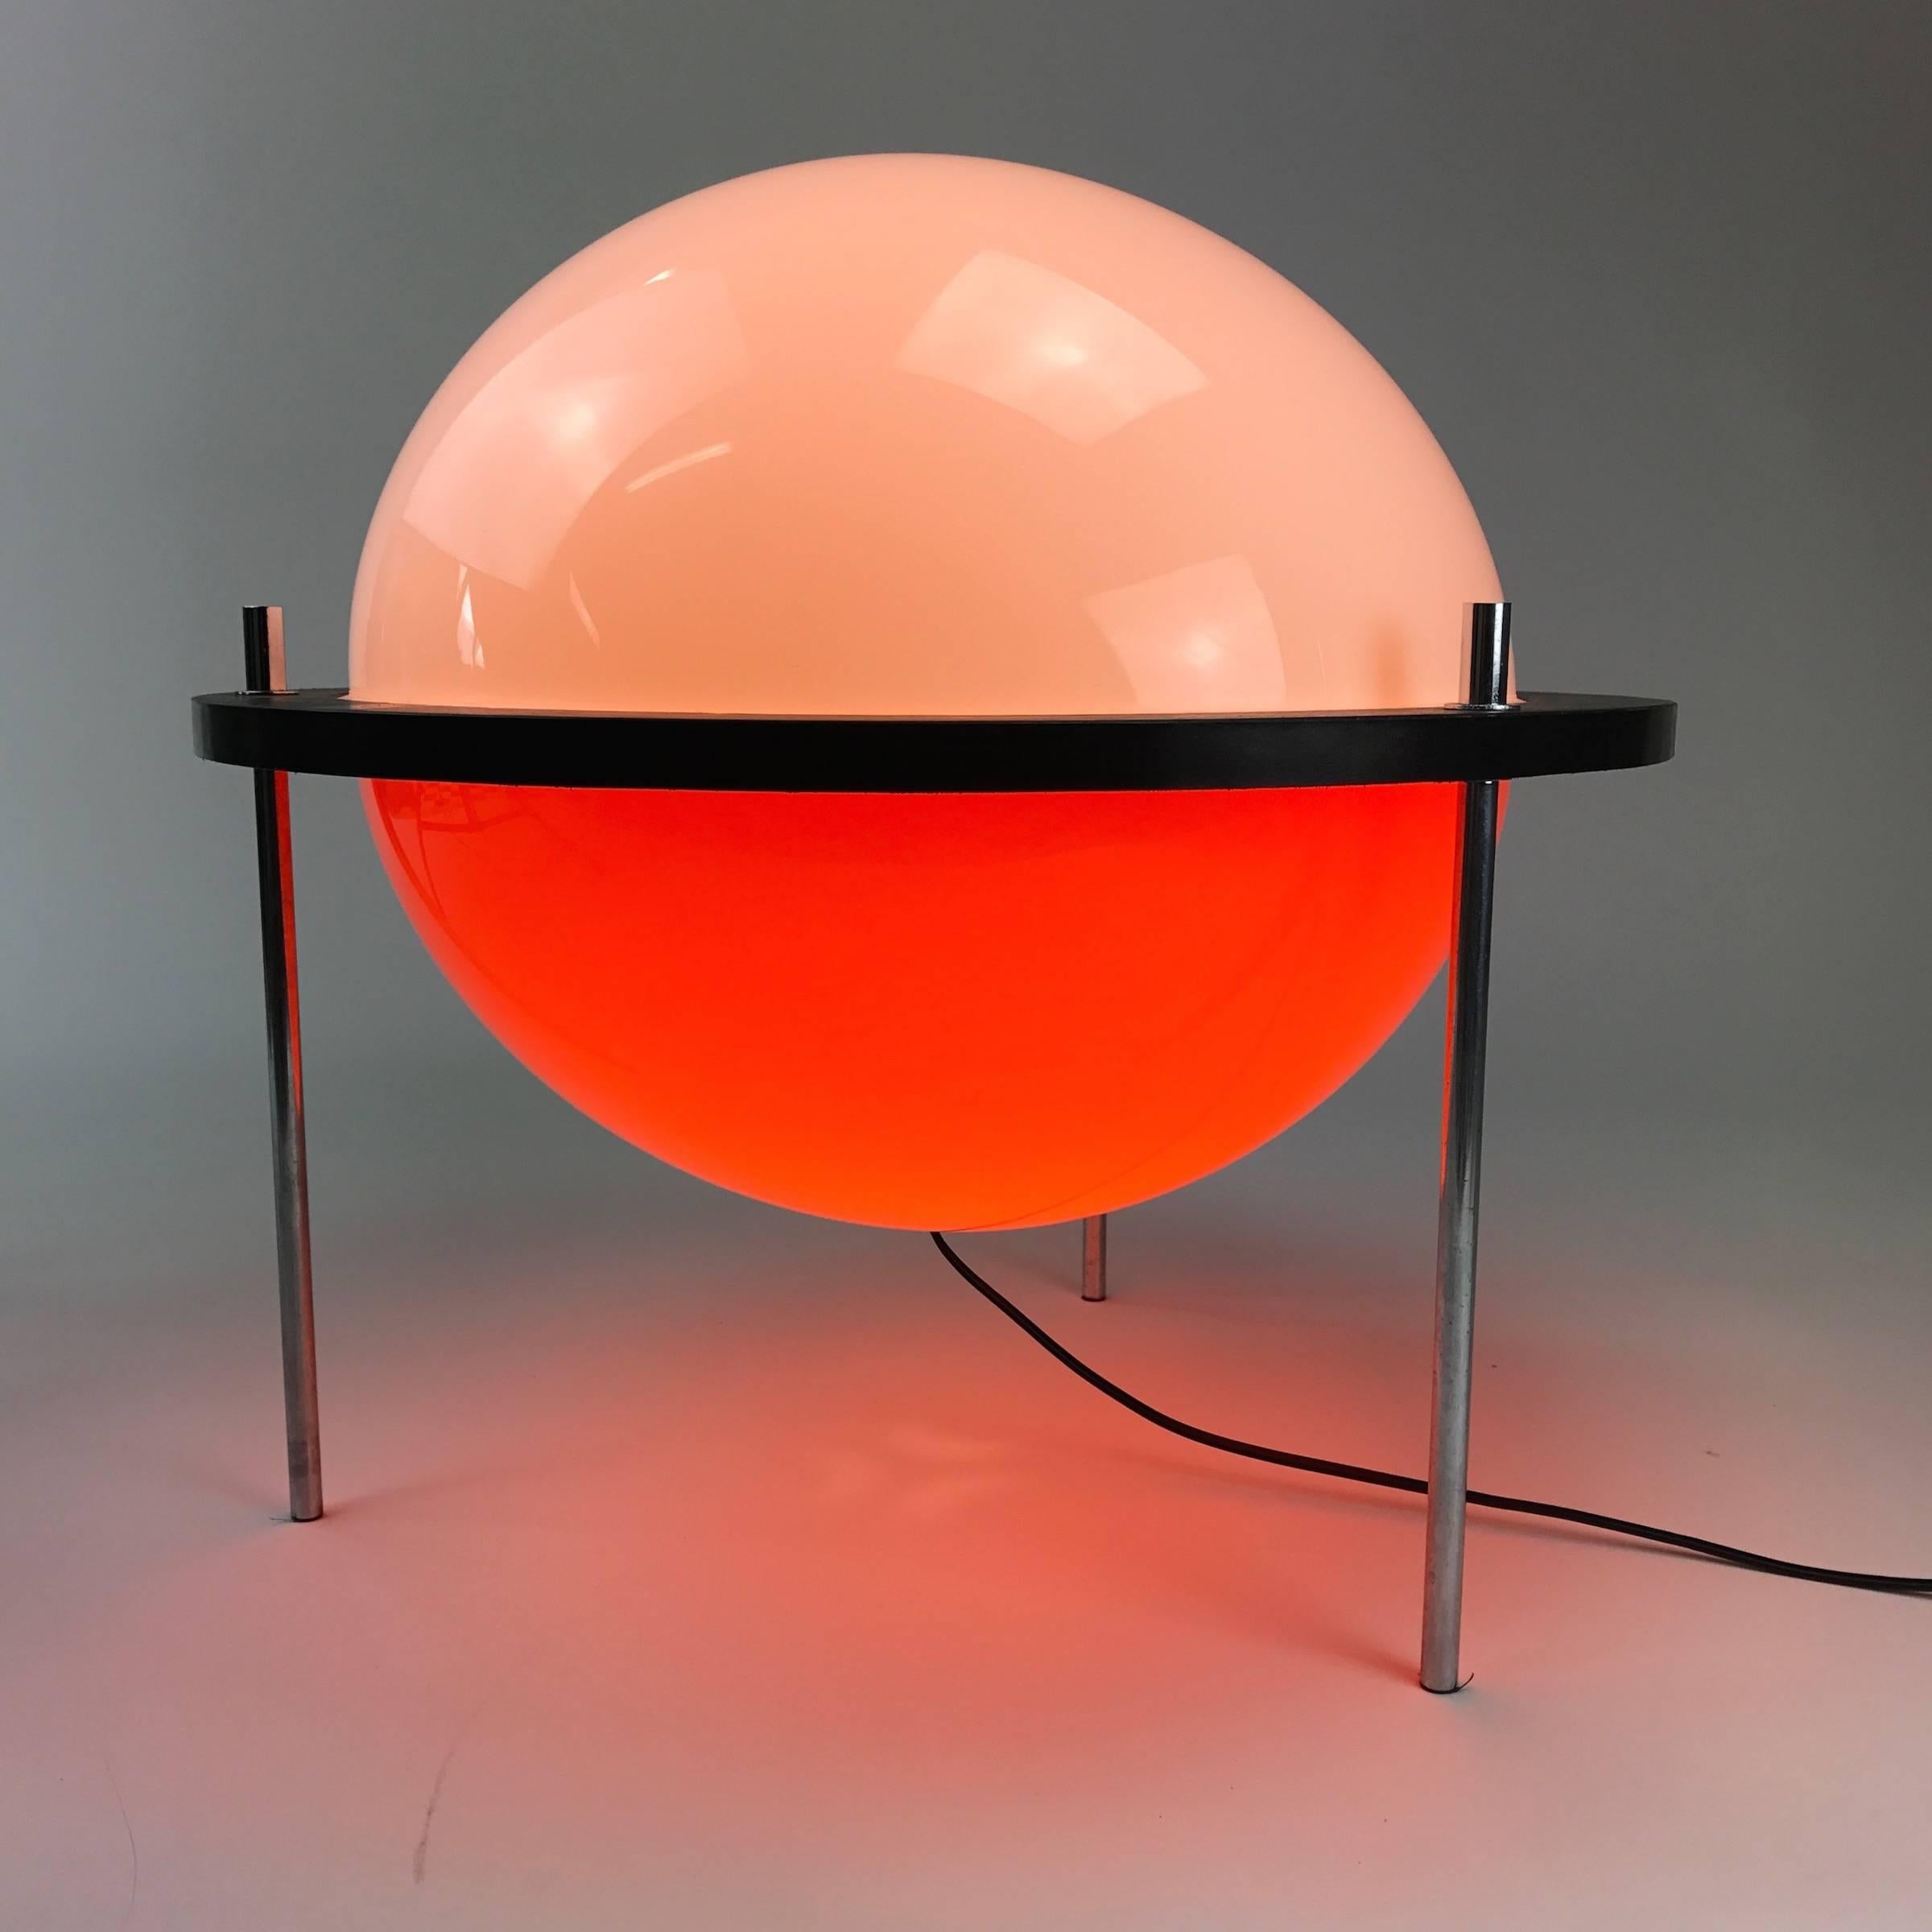 Very large globe shaped floor lamp by Harvey Guzzini, Italy. 

Rare piece of Italian Space Age design made of two large plastic half spherical pieces. The black centrepiece is made of black lacquered wood. Three chrome rods makes out the stand.